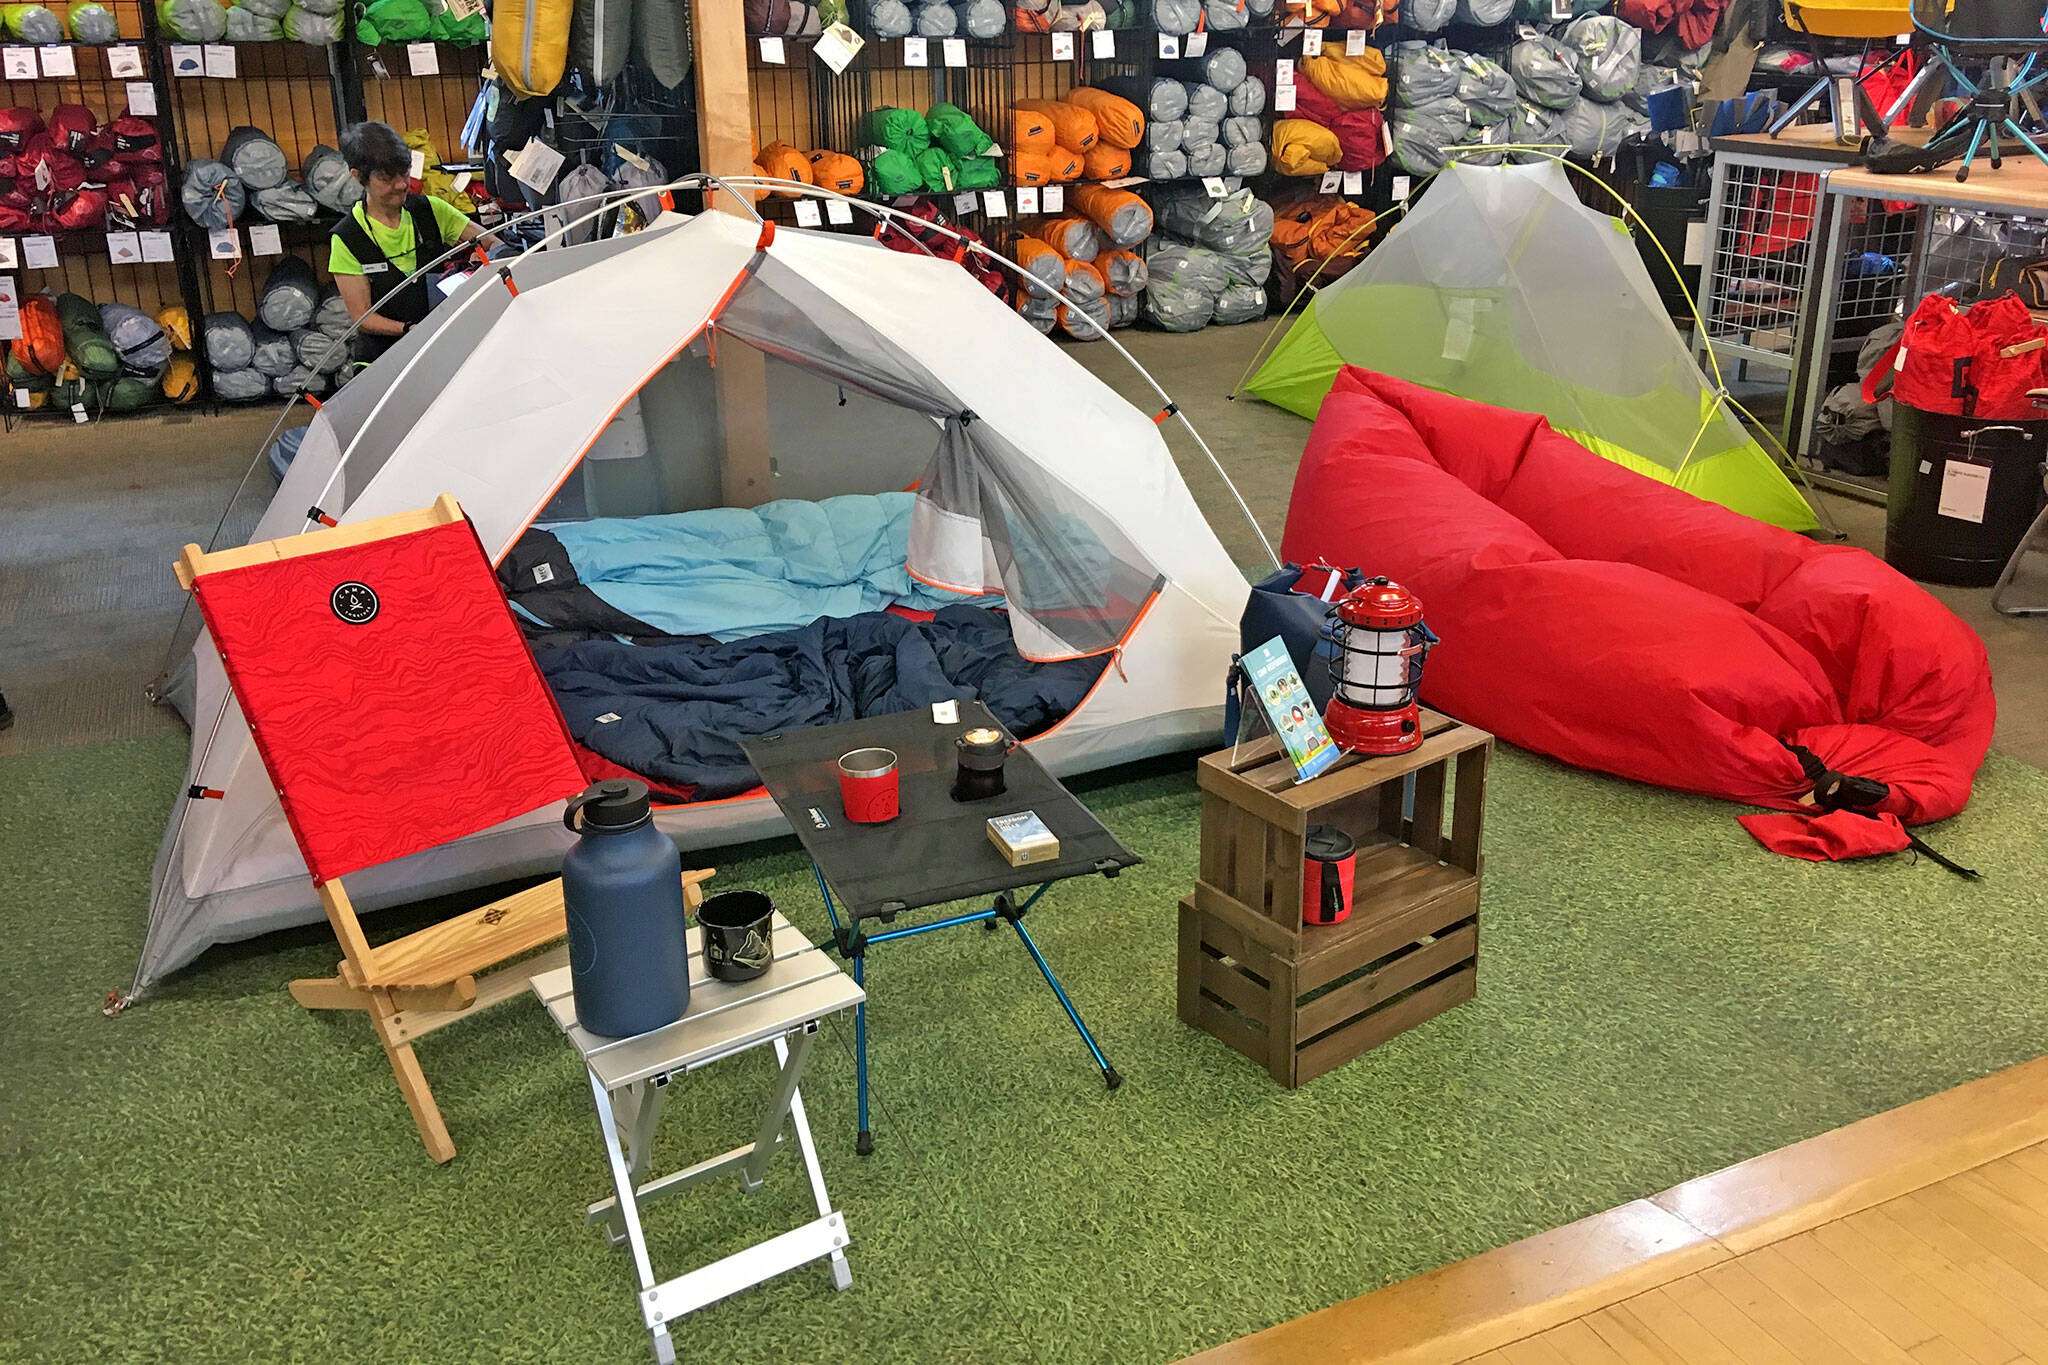 10 stores to buy camping gear and equipment in Toronto